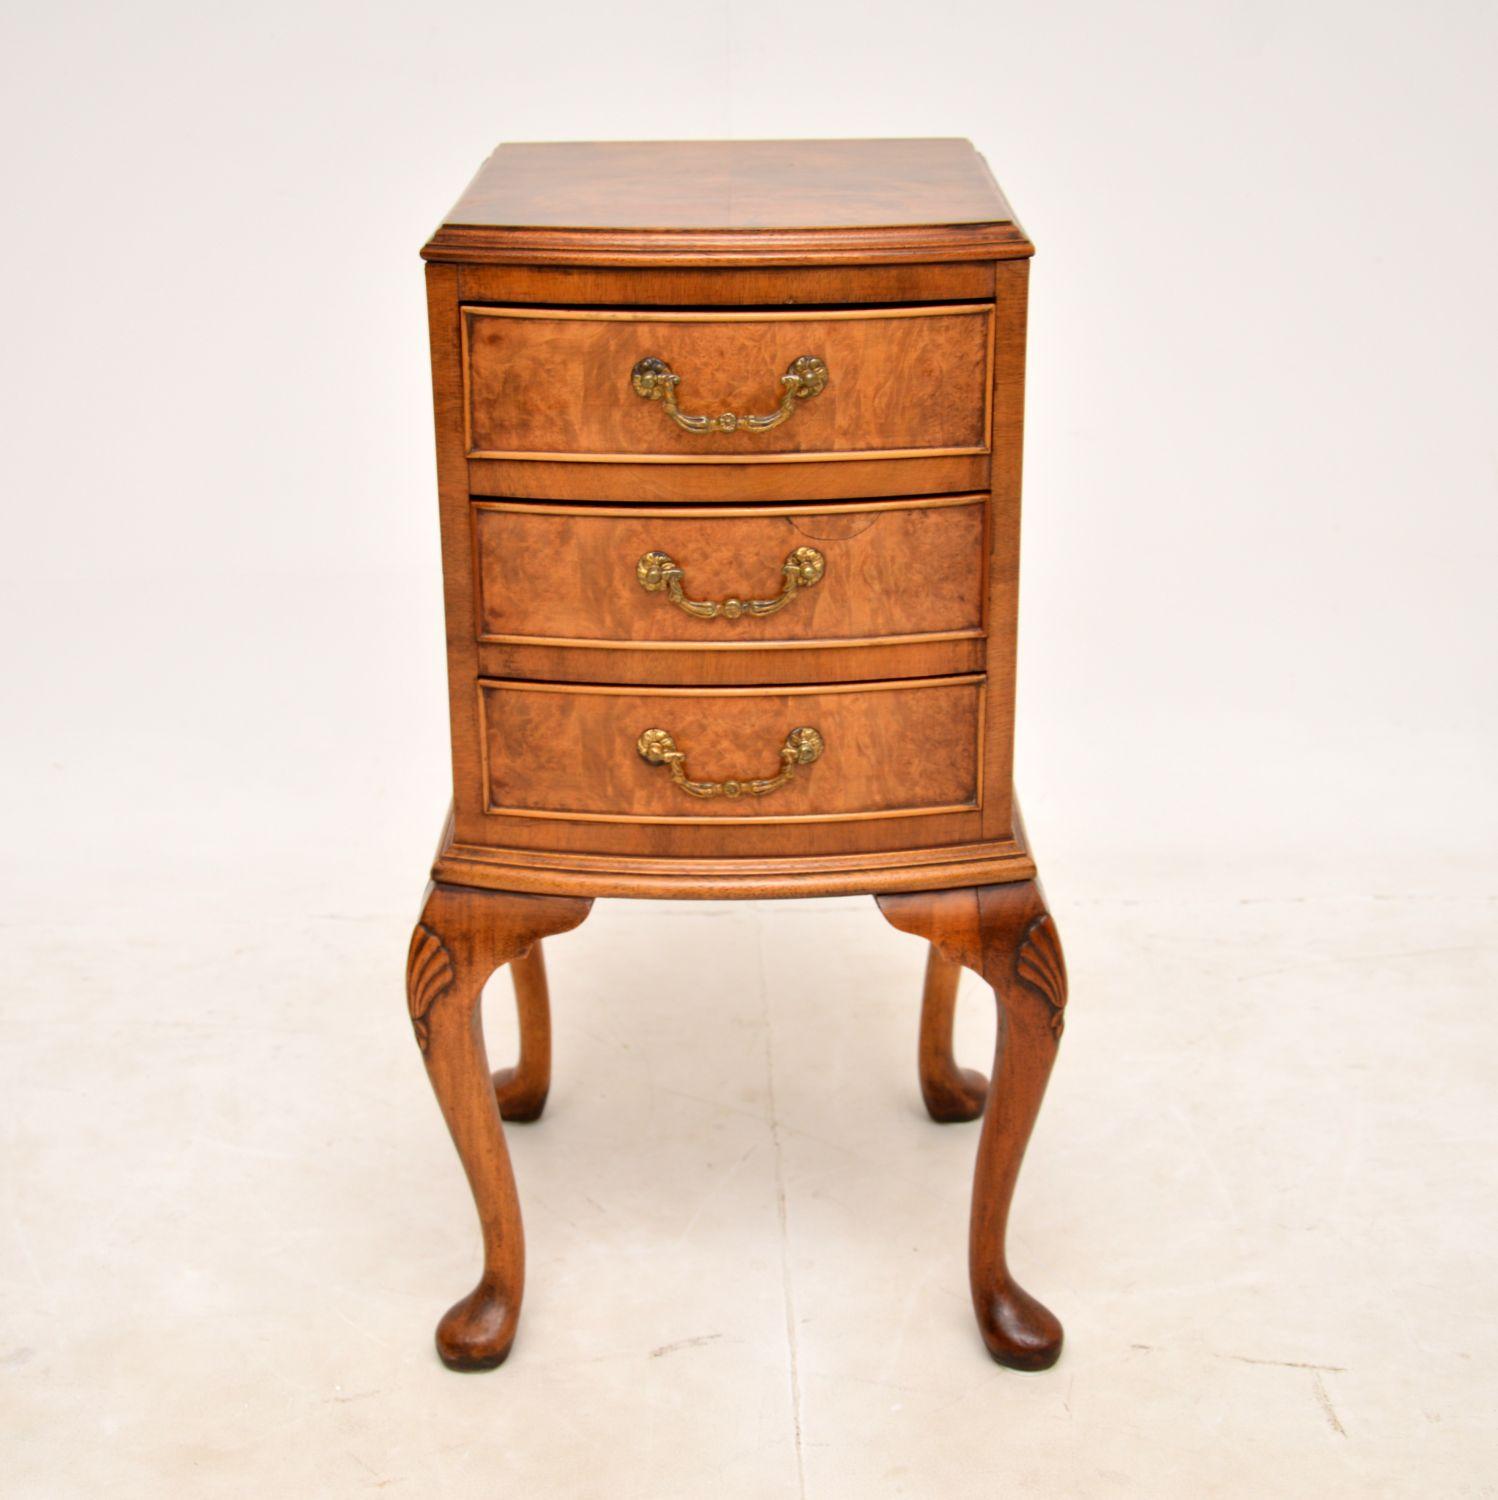 A beautiful antique chest of drawers on legs in burr walnut. This was made in England, it dates from around the 1920s-1930s.

The quality is excellent, this has absolutely gorgeous burr walnut grain patterns throughout. It is a very useful size to